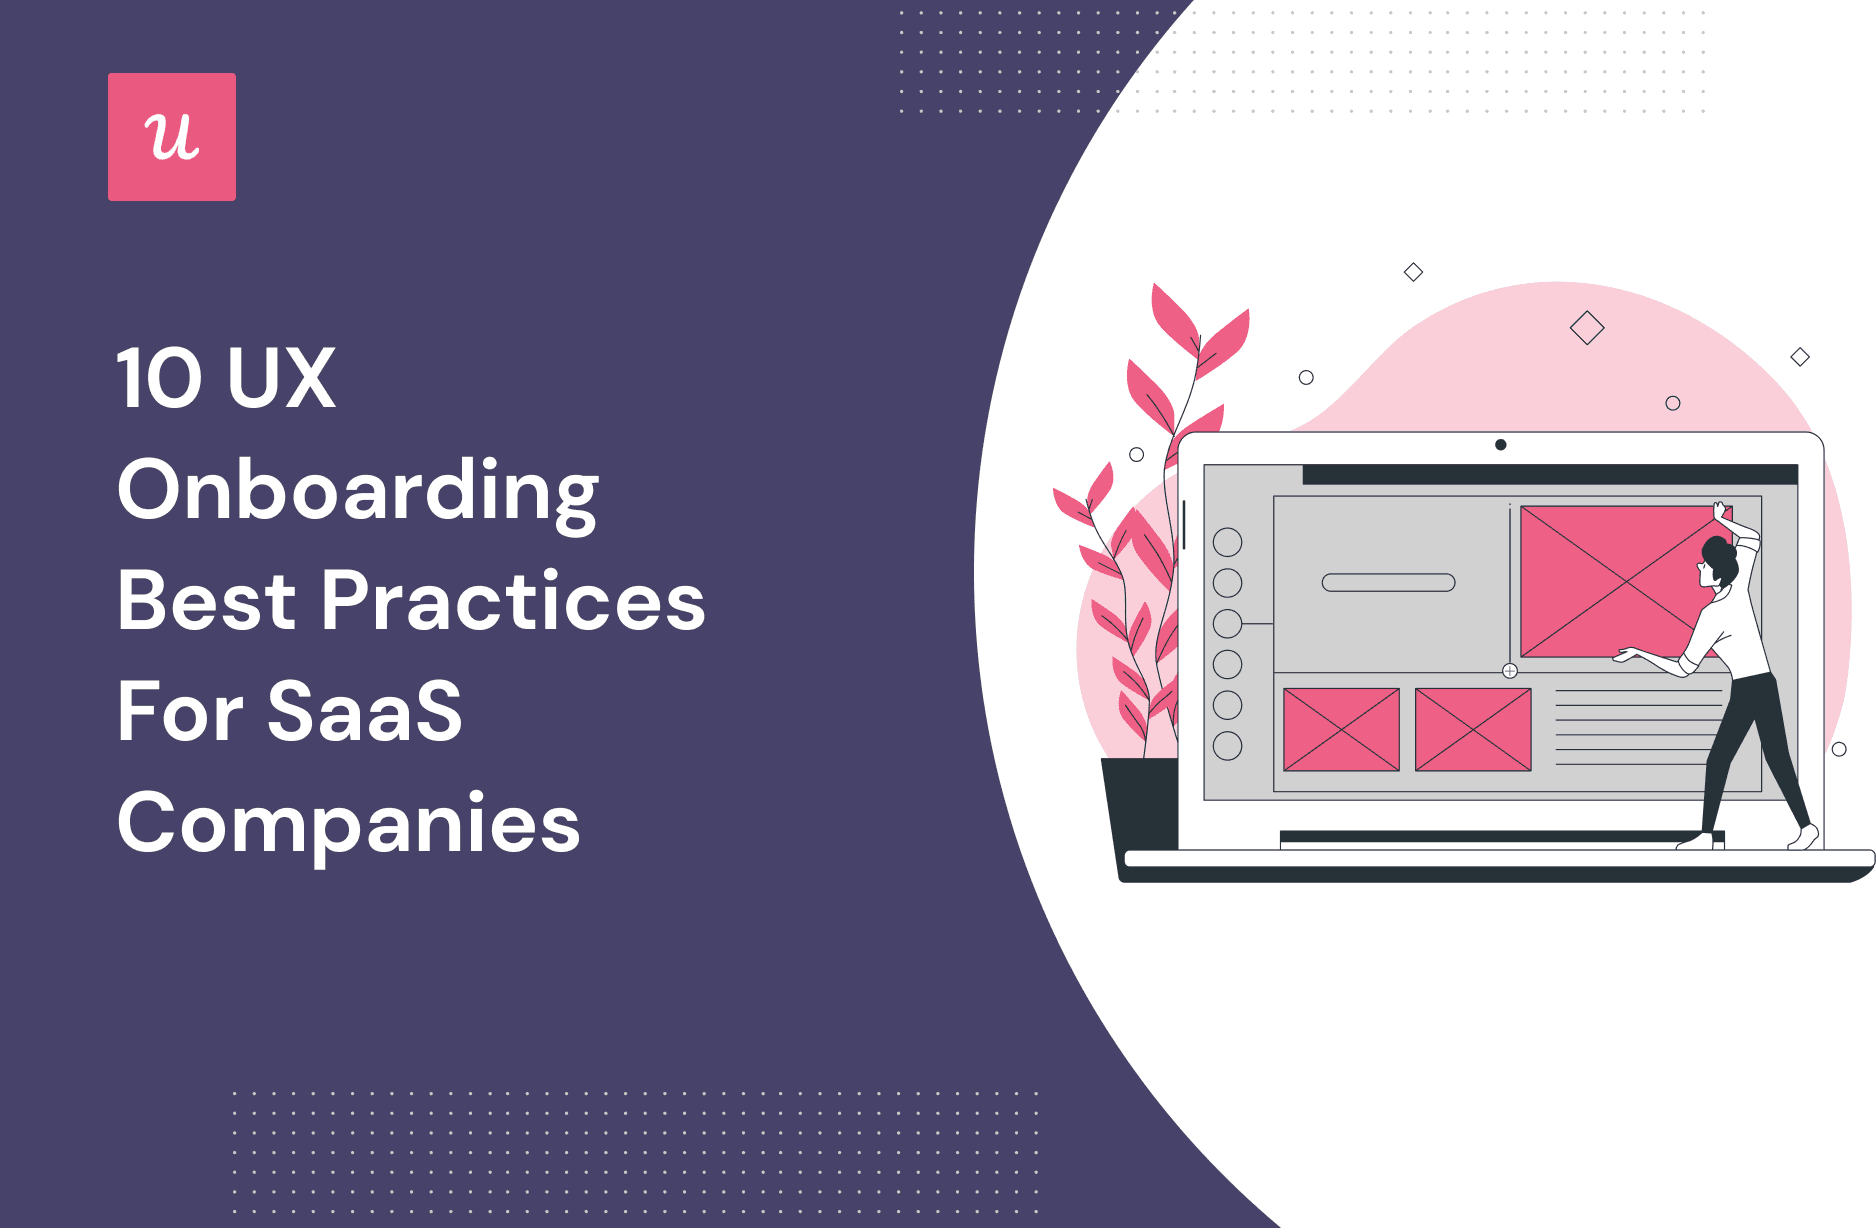 20 UX Onboarding Best Practices For SaaS Companies cover